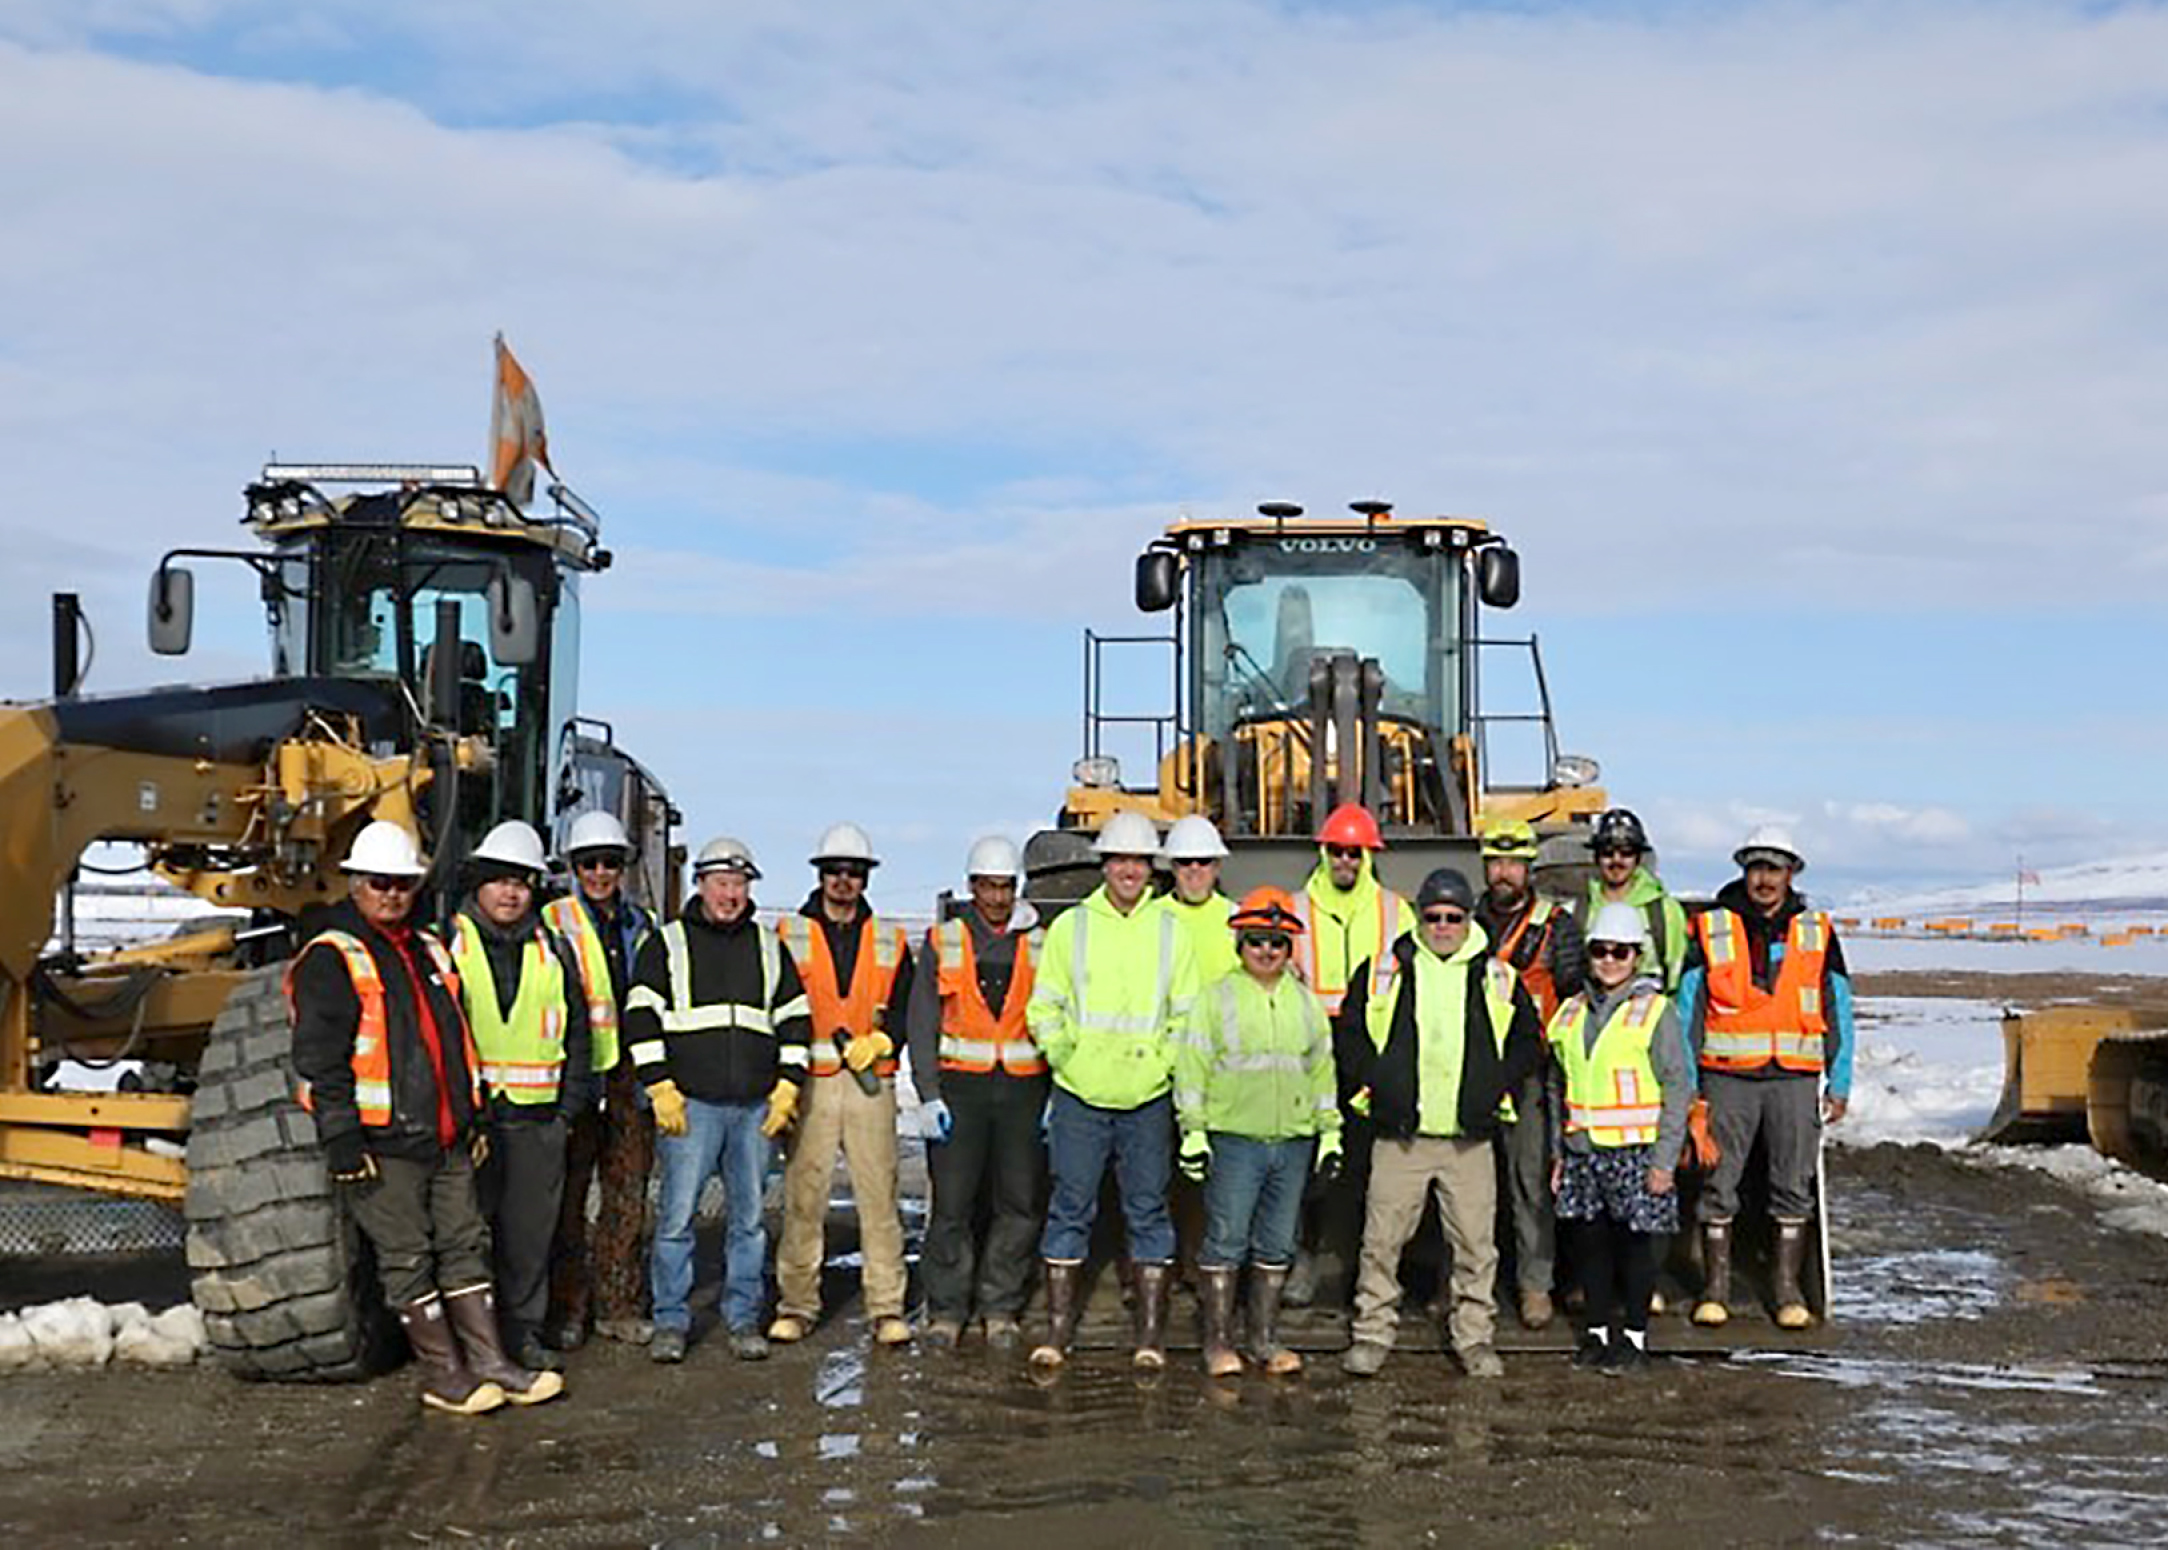 Drake Construction crew members in front of motor grader and bulldozer